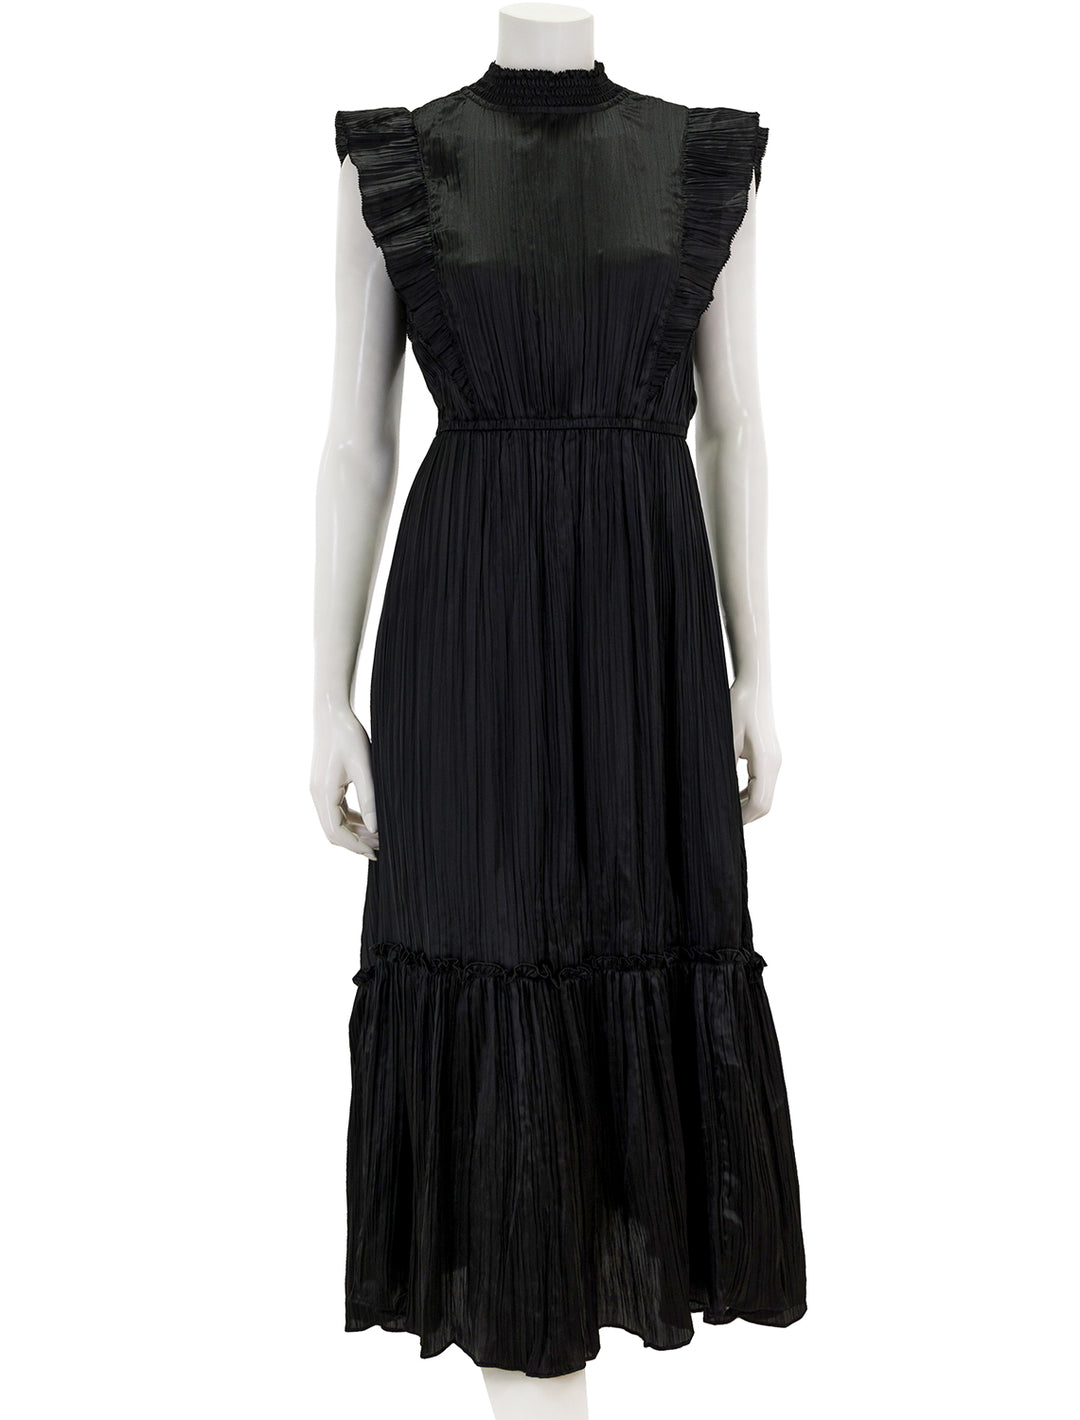 Front view of Steve Madden's wednesday dress in black.